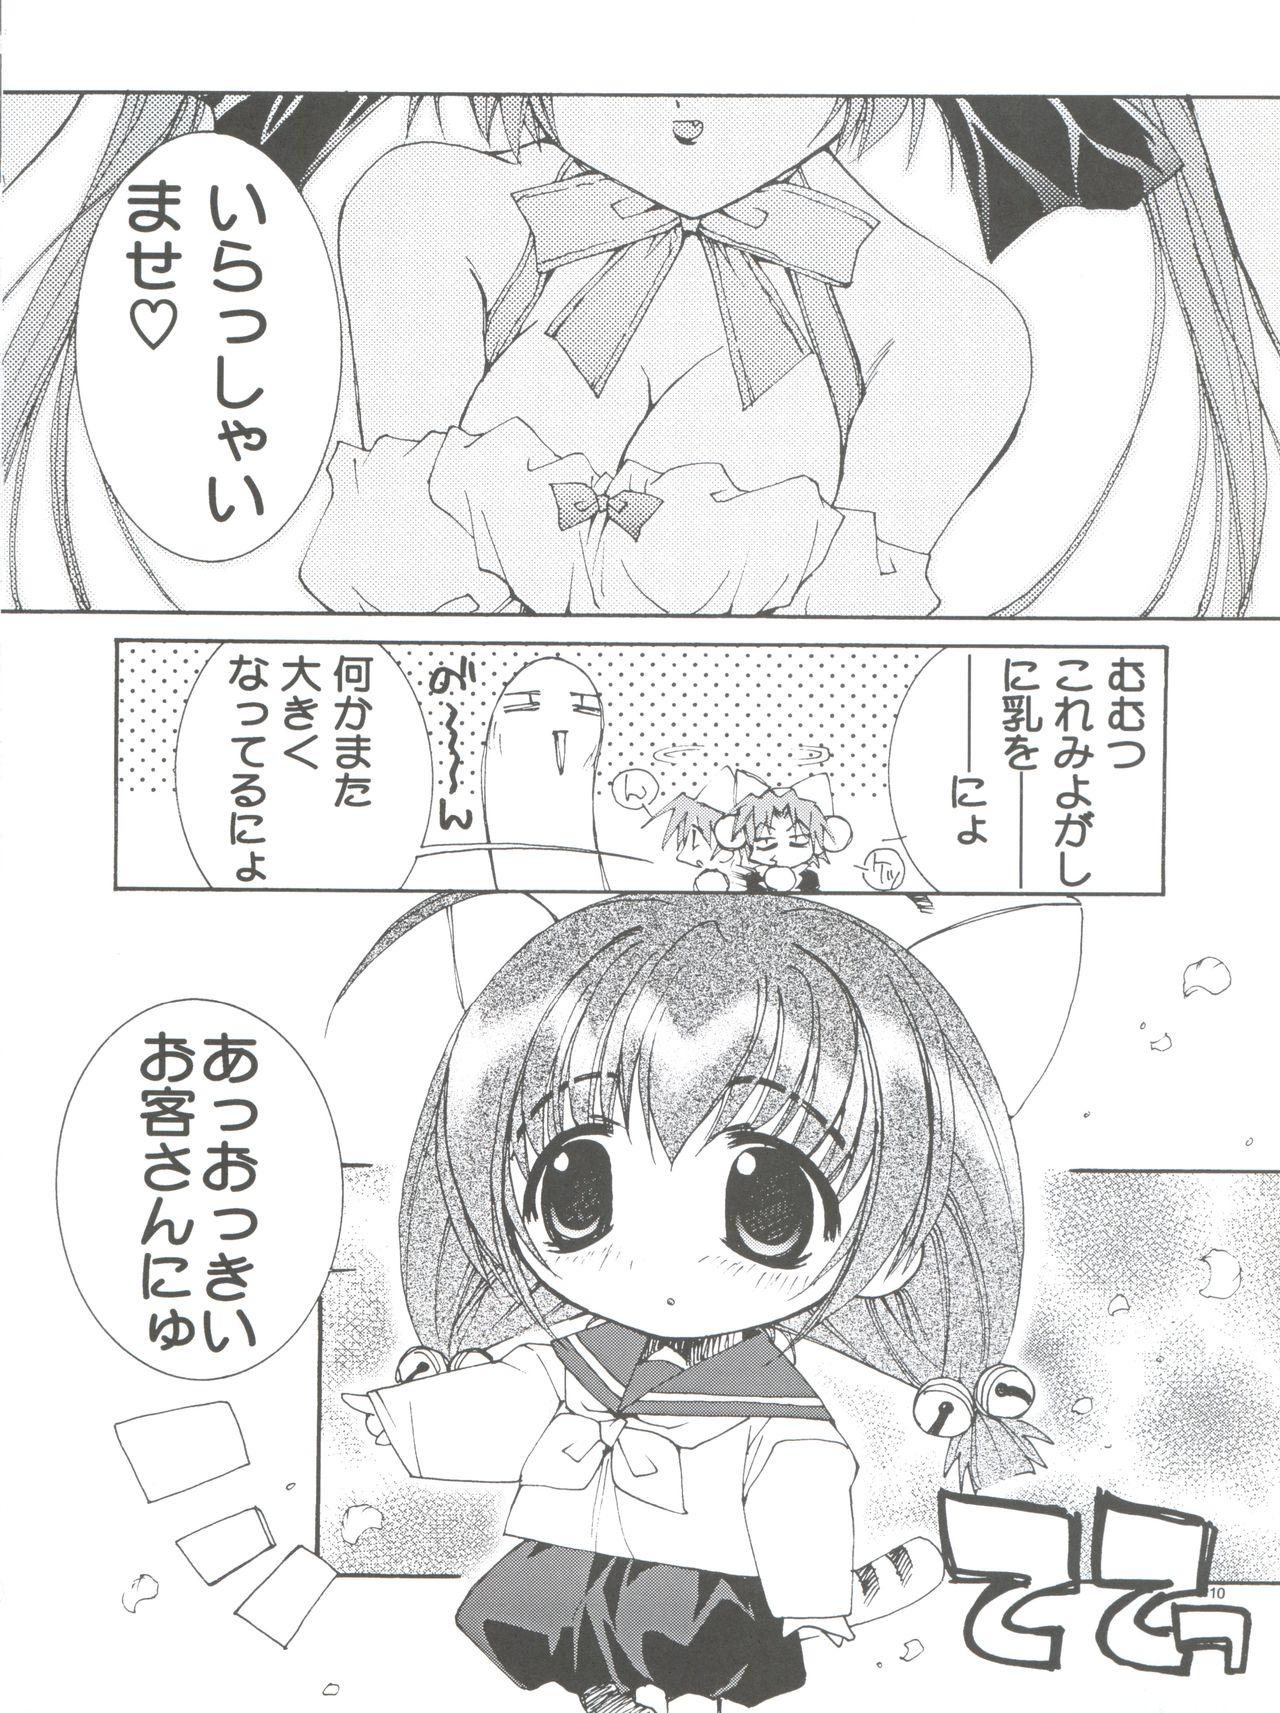 Beautiful Pussy CAT White - Cardcaptor sakura To heart Di gi charat Audition - Page 10